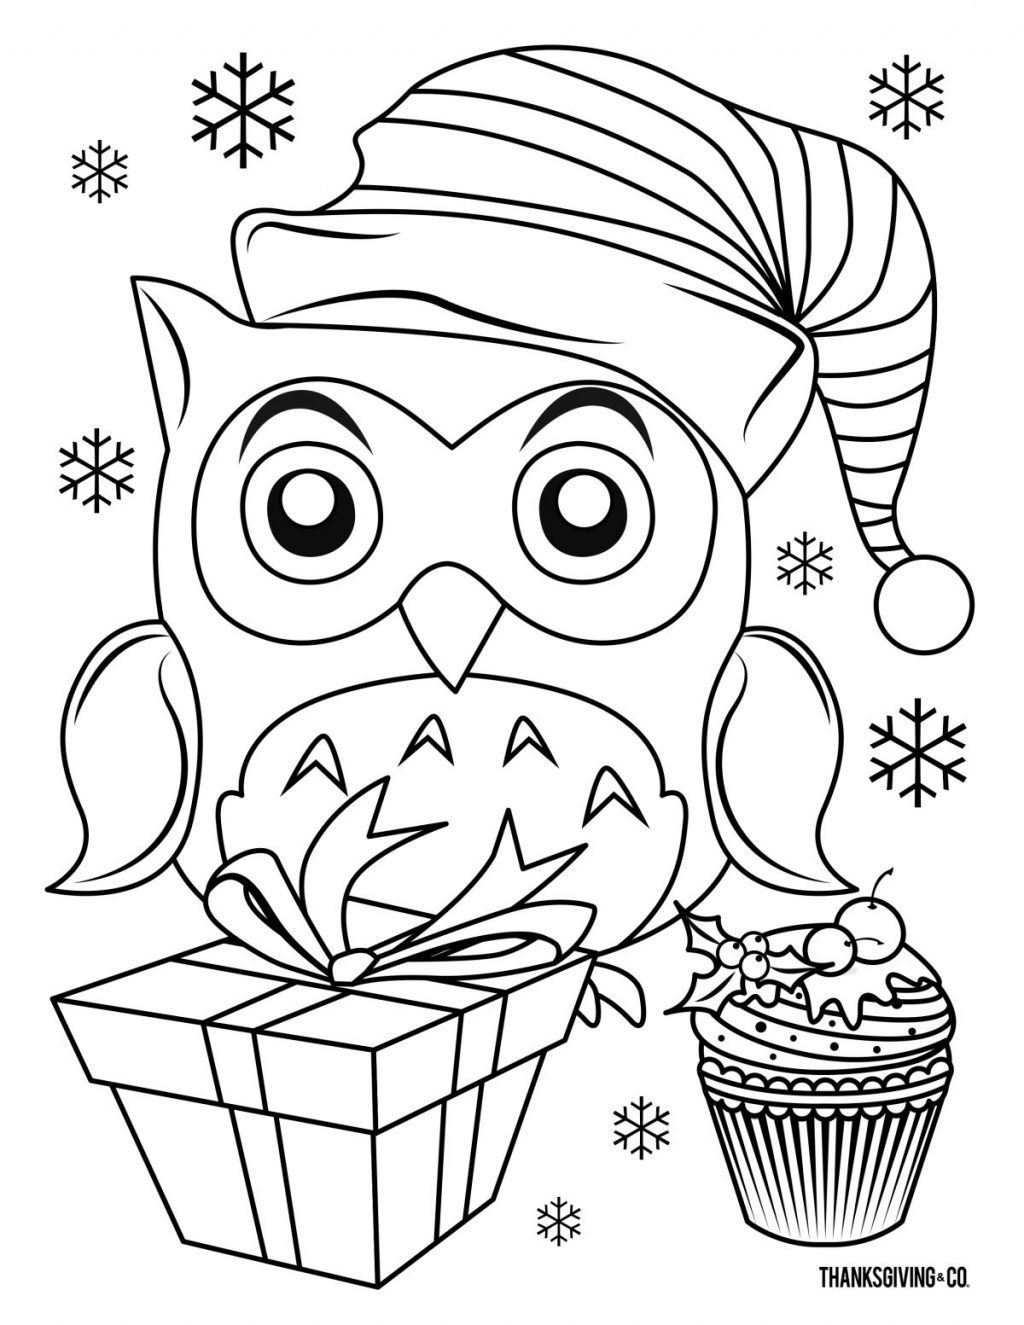 Children's Christmas Coloring Pages Free Coloring Pages And Books 38 Kids Christmas Coloring Pages Photo